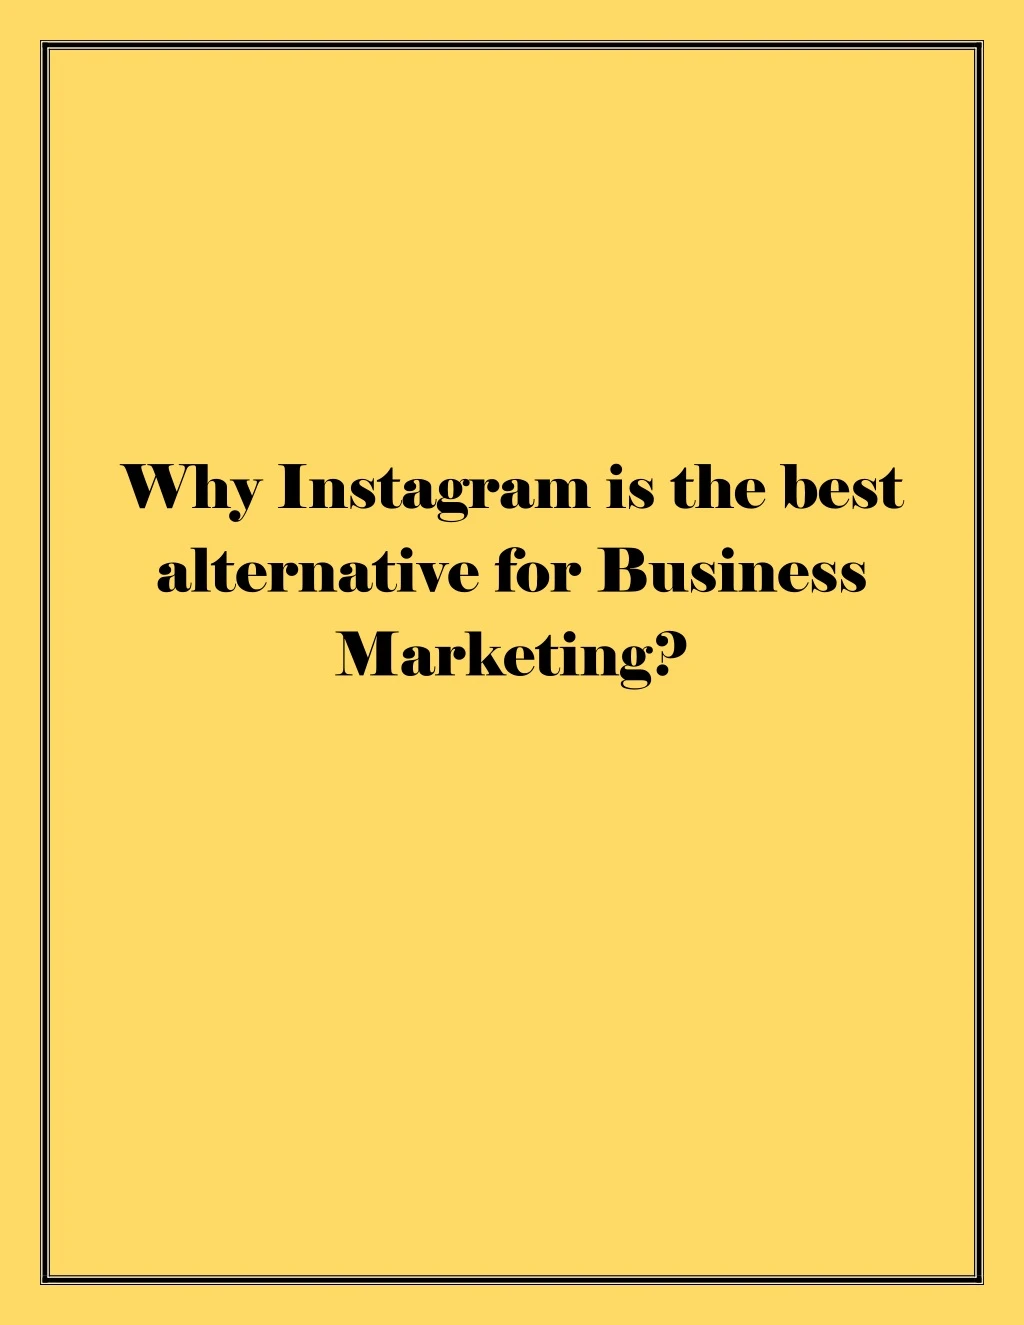 why instagram is the best alternative